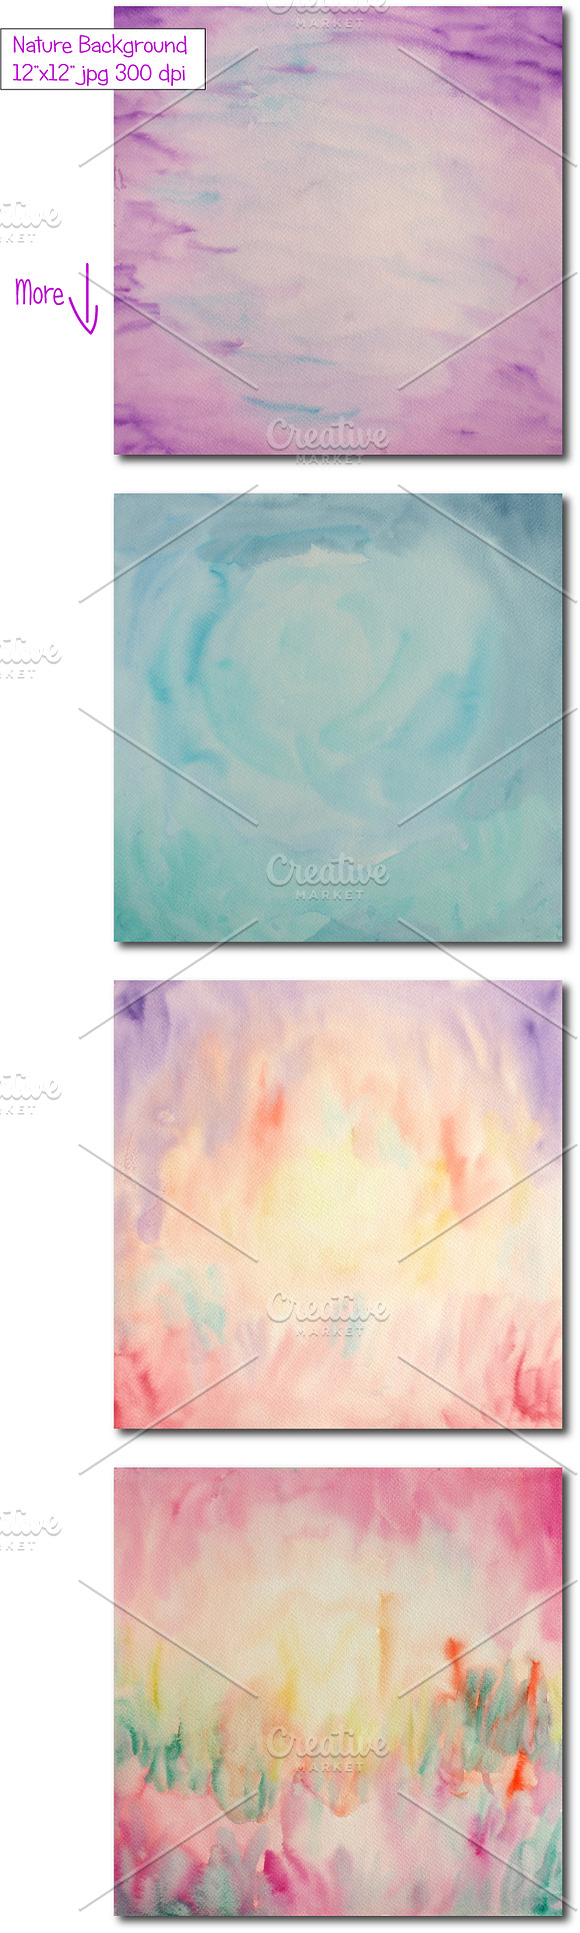 Watercolor Nature Background in Illustrations - product preview 1